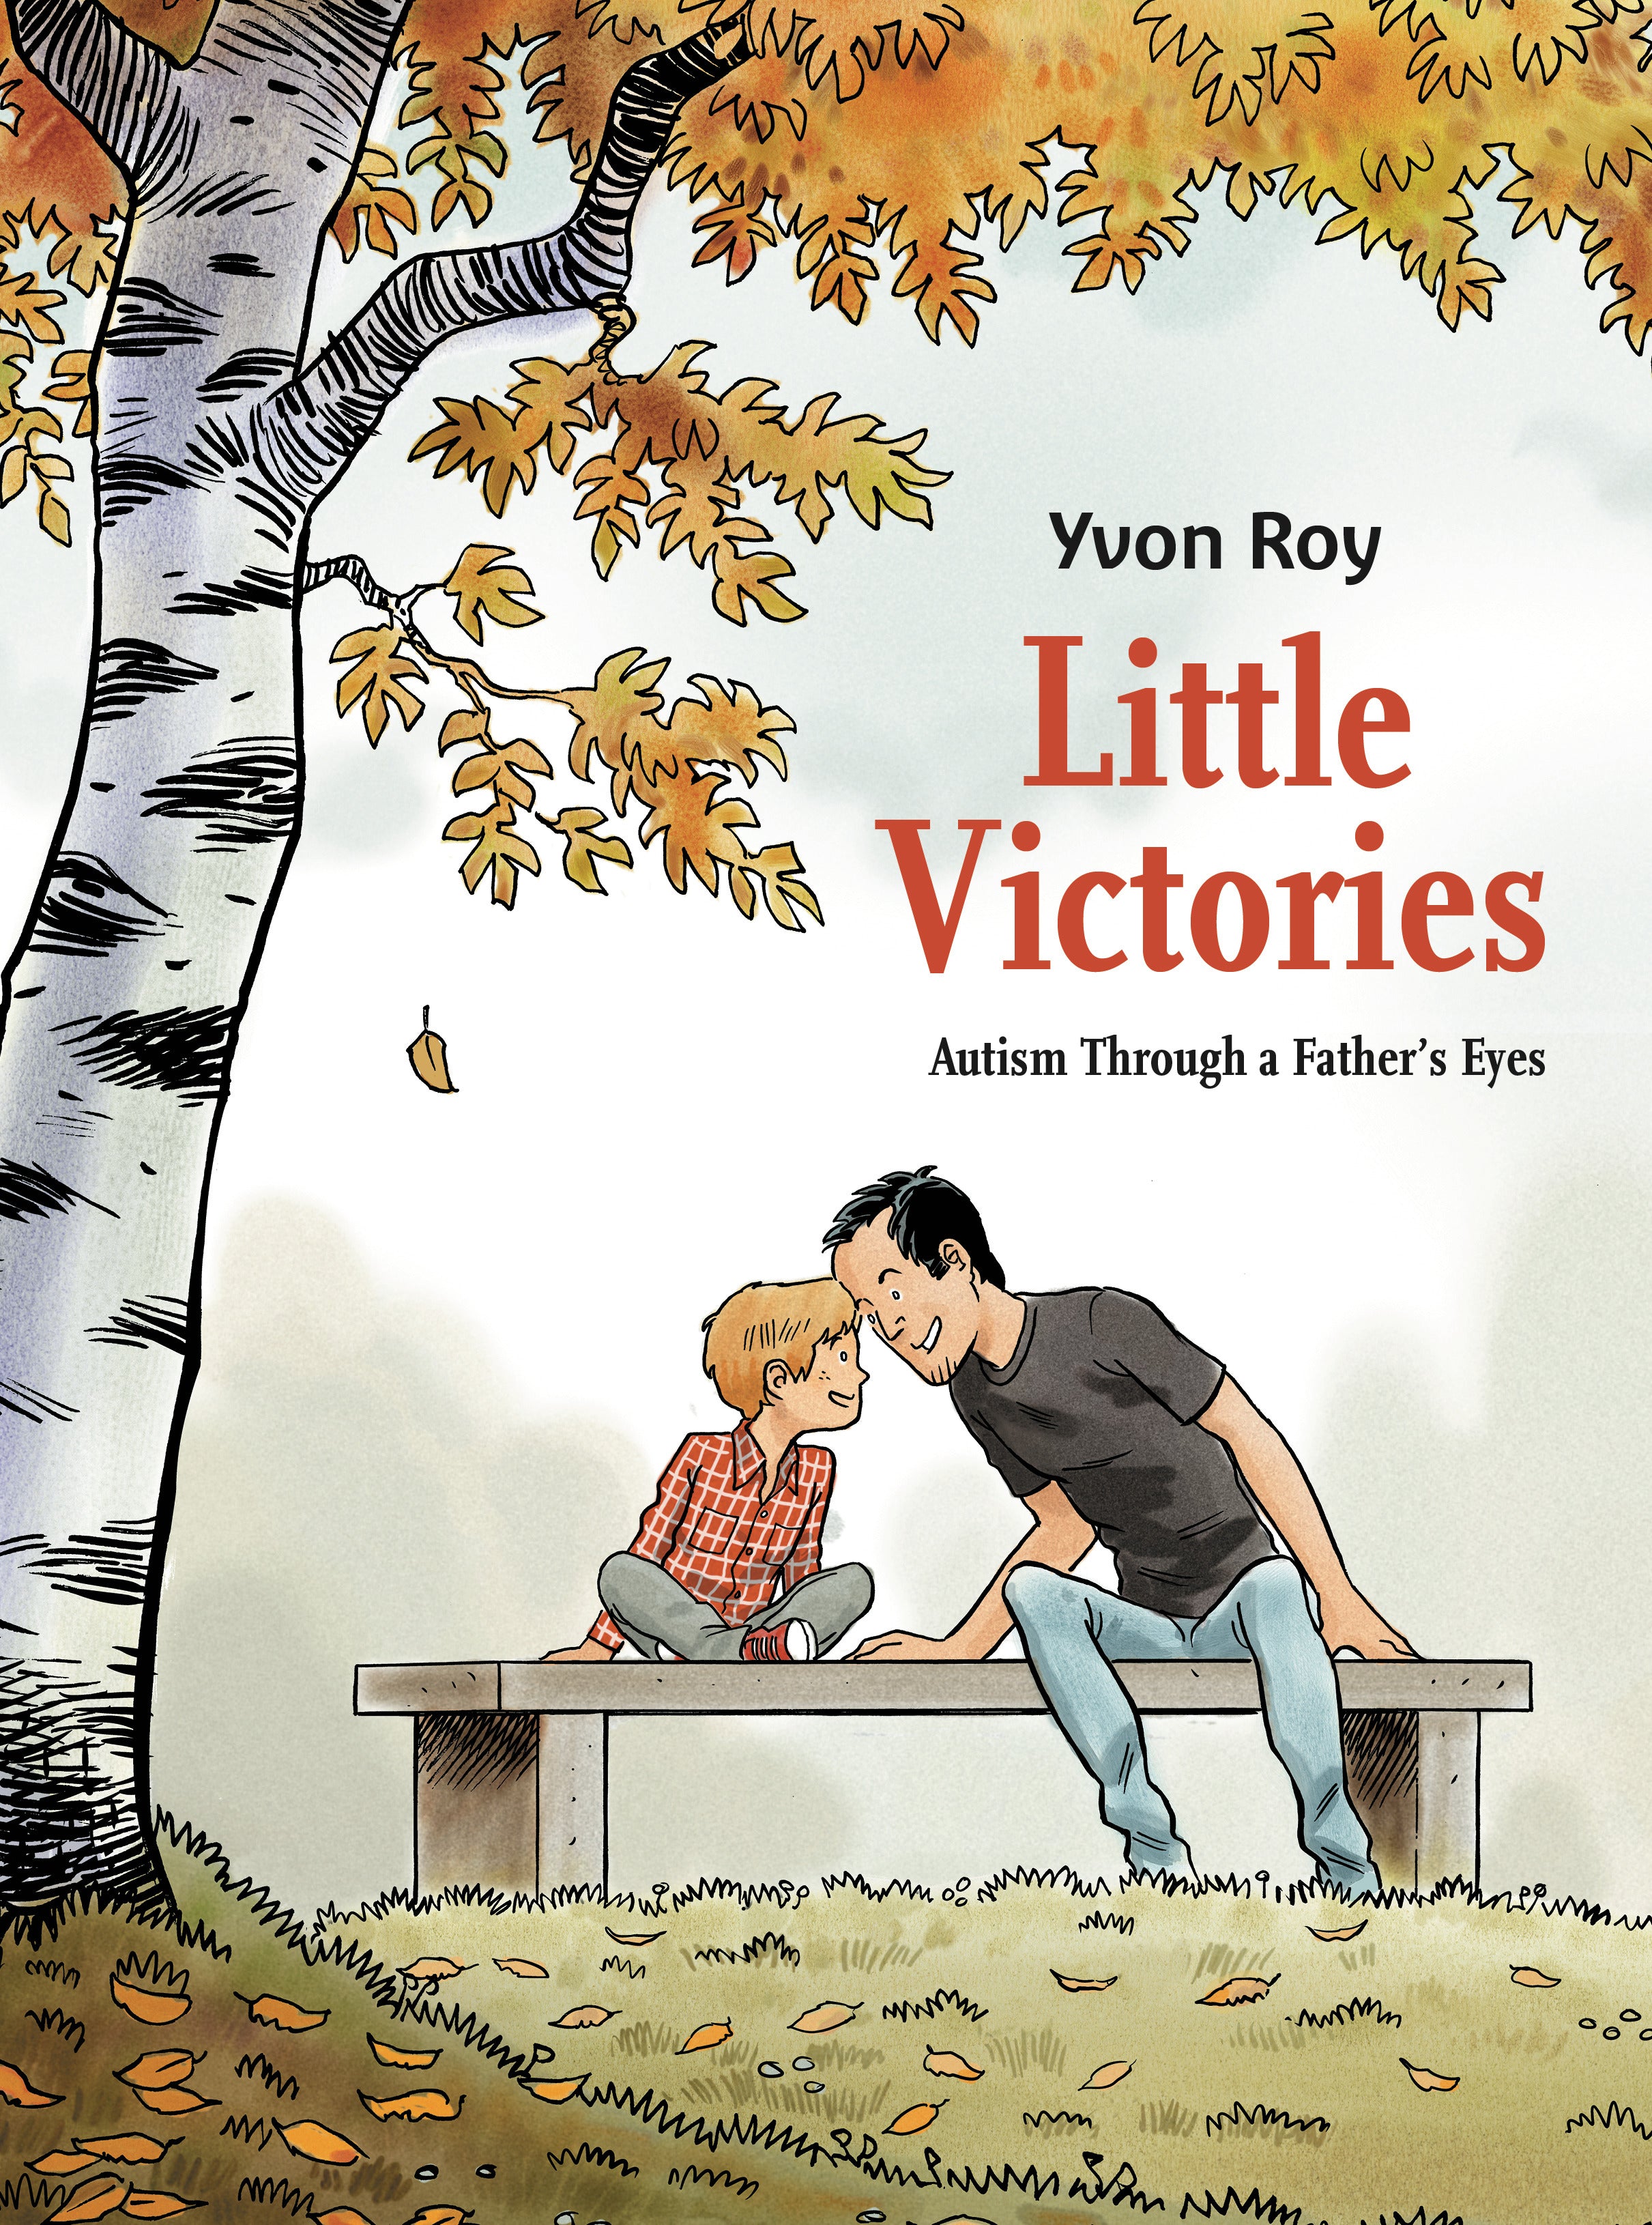 Little Victories: Autism Through a Father's Eyes (Graphic Novel)